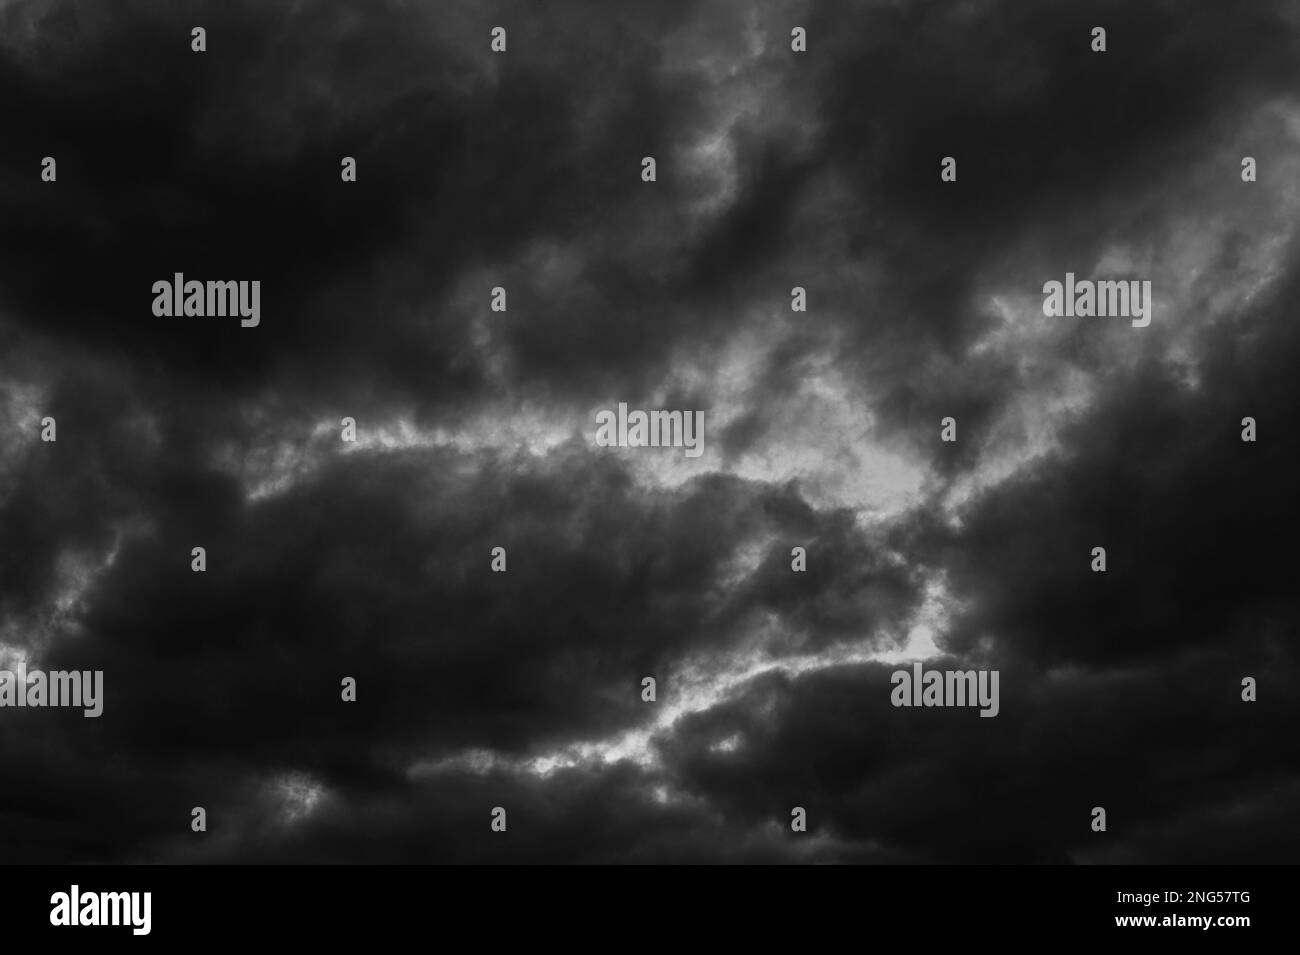 Stratocumulus clouds darkening skies with cloud patterns and shapes Stock Photo